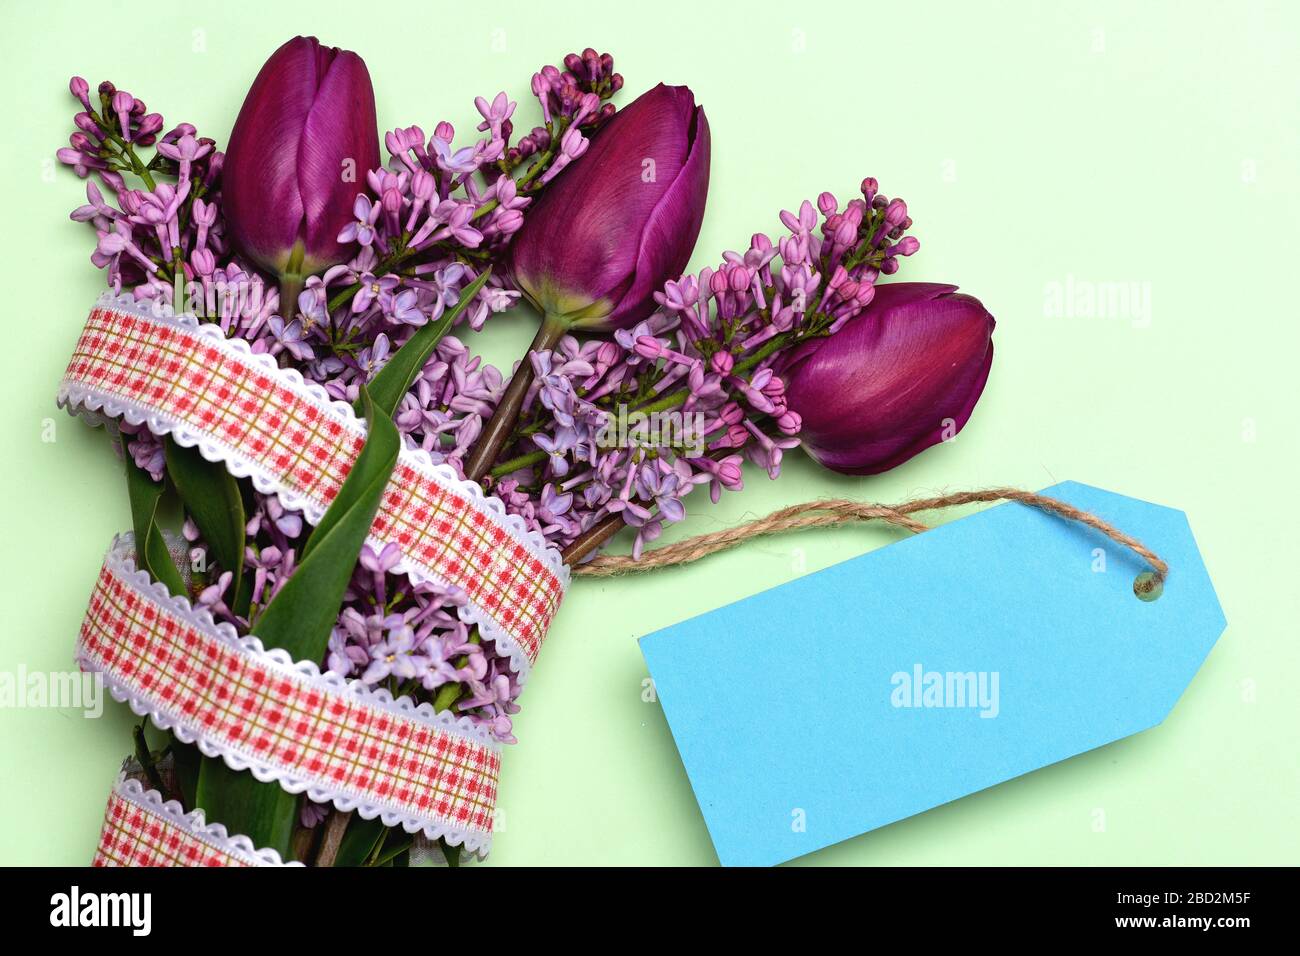 Bunch of lilac and tulips belted with plaid rustic ribbon in red and white with bright blue label isolated on light background. Top view and copy space, concept of gift and spring holiday Stock Photo